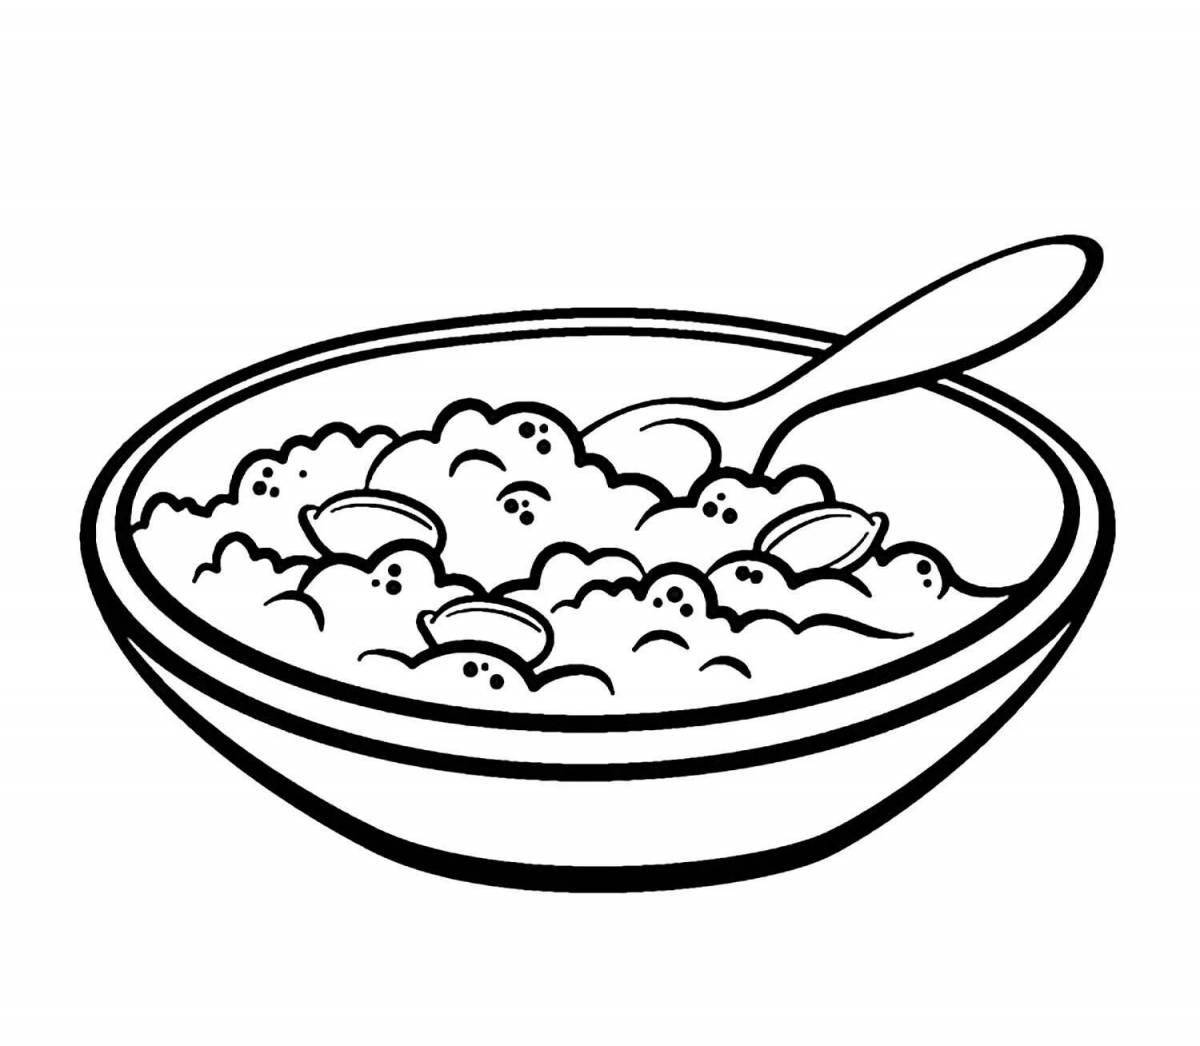 Coloring page charming cottage cheese